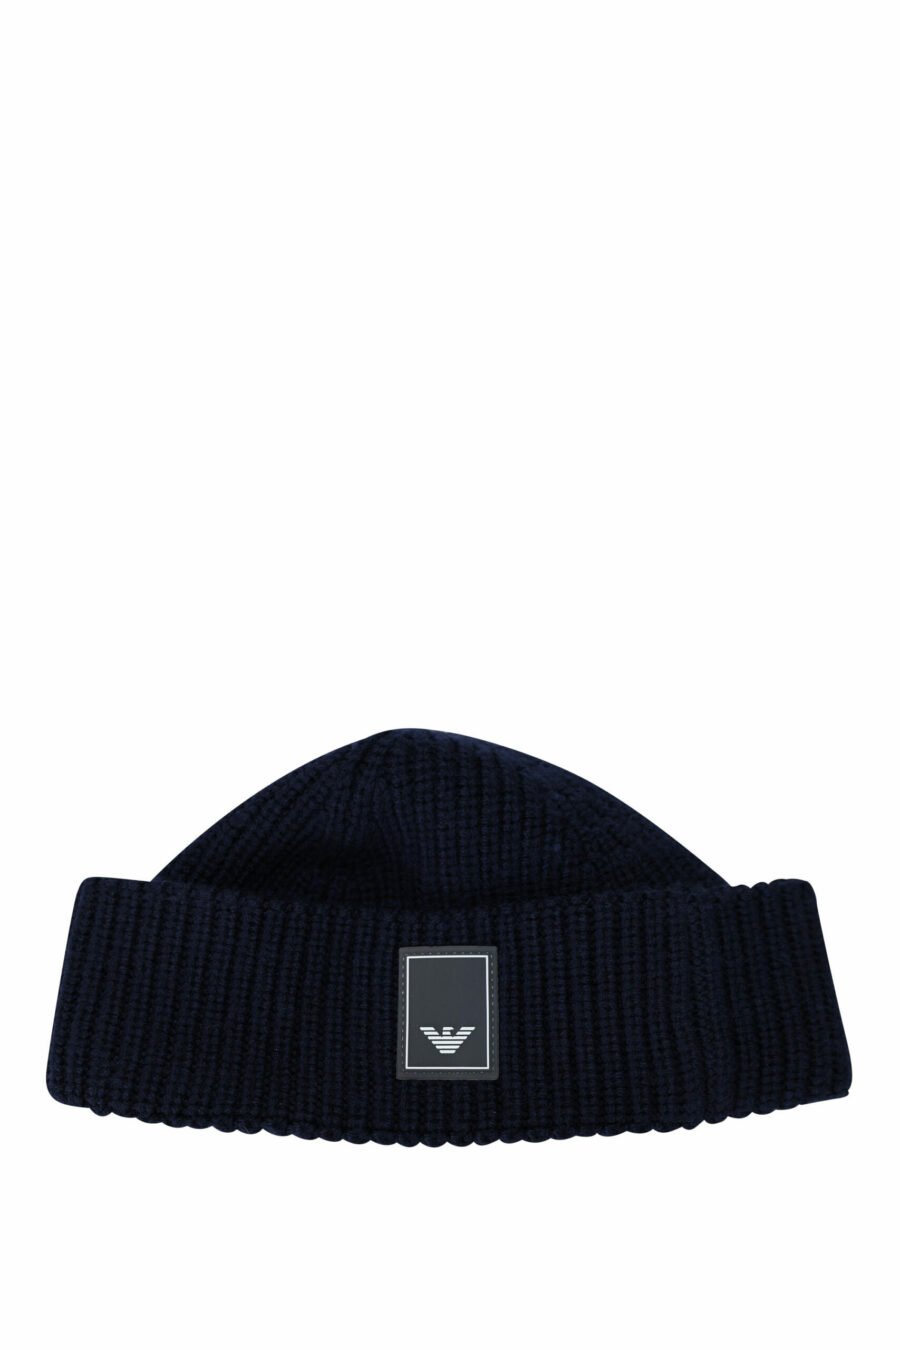 Navy blue cap with eagle label - 8057767842345 scaled